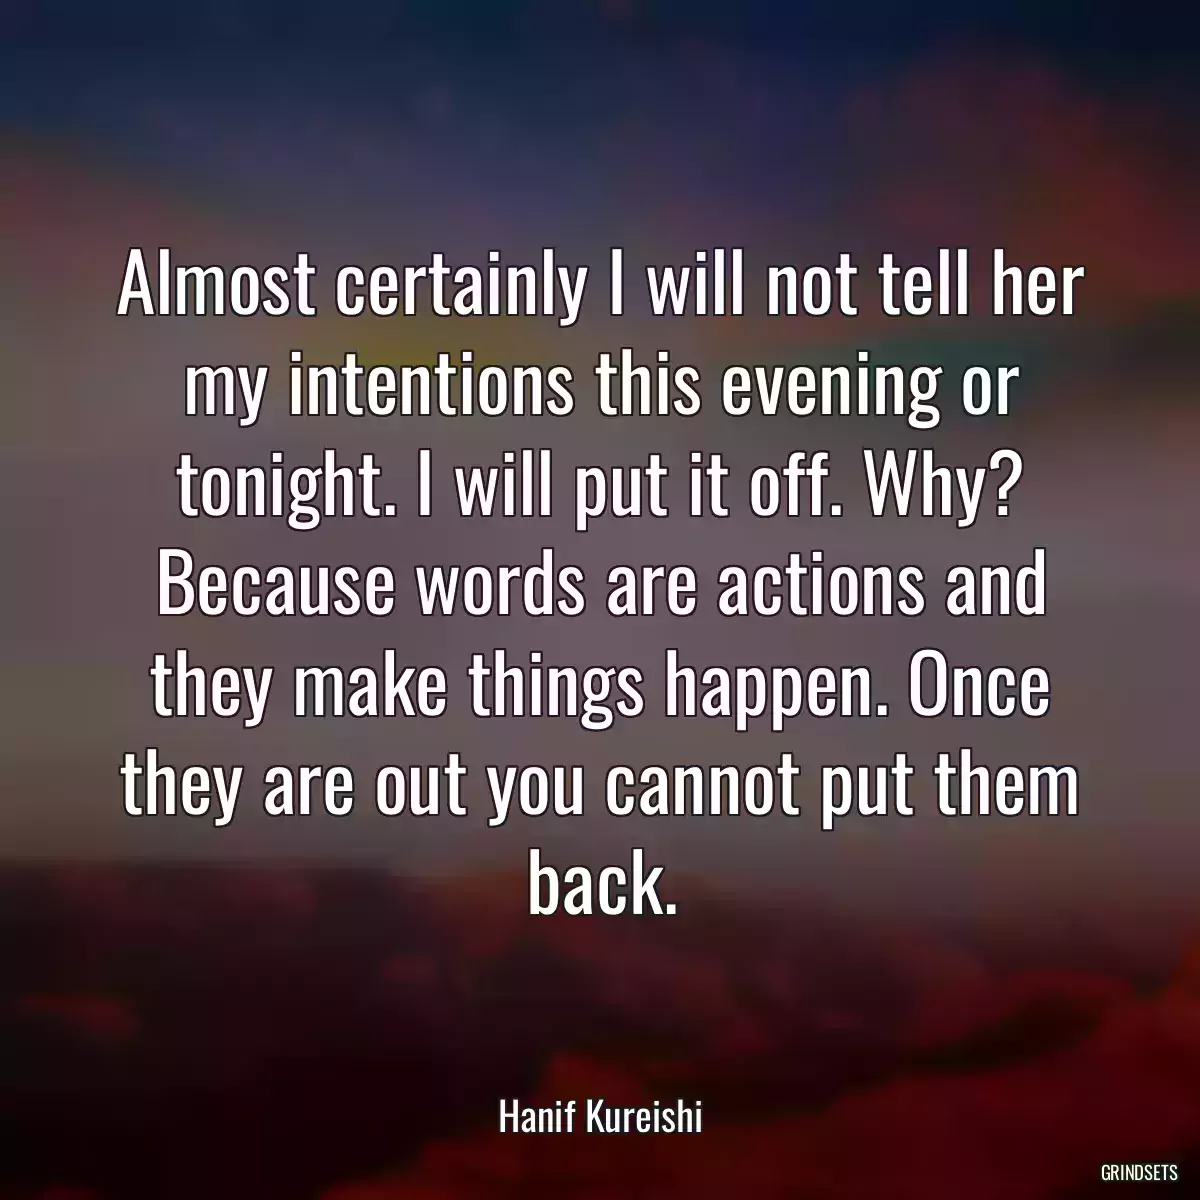 Almost certainly I will not tell her my intentions this evening or tonight. I will put it off. Why? Because words are actions and they make things happen. Once they are out you cannot put them back.